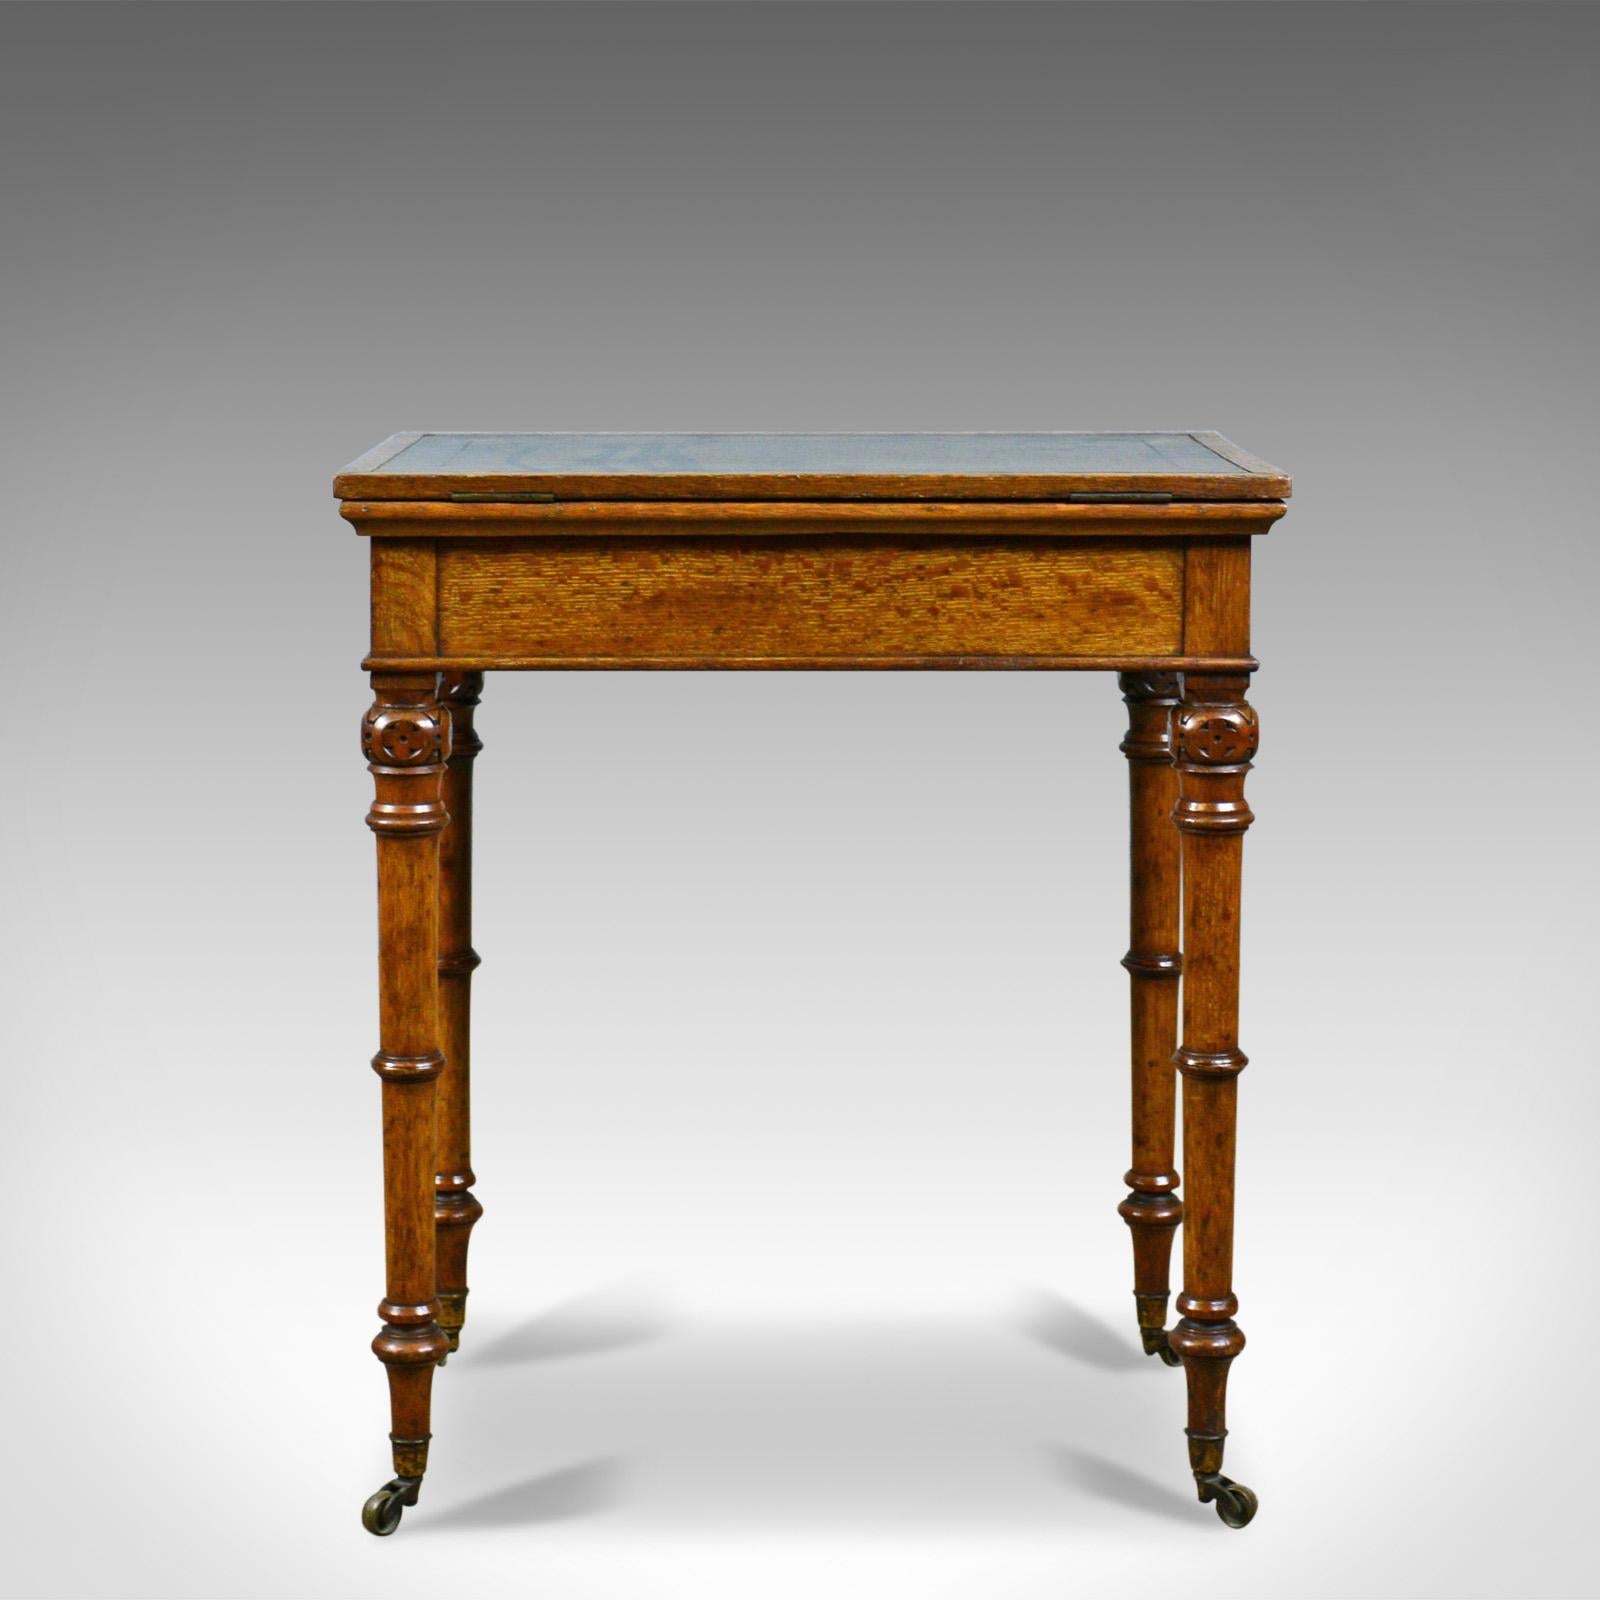 This is an antique adjustable writing table, an English, oak leather top desk by sought after cabinet maker Johnstone & Jeanes of 67 New Bond Street, London. This table dating to circa 1850 around the time of The Great Exhibition.

Of exceptional